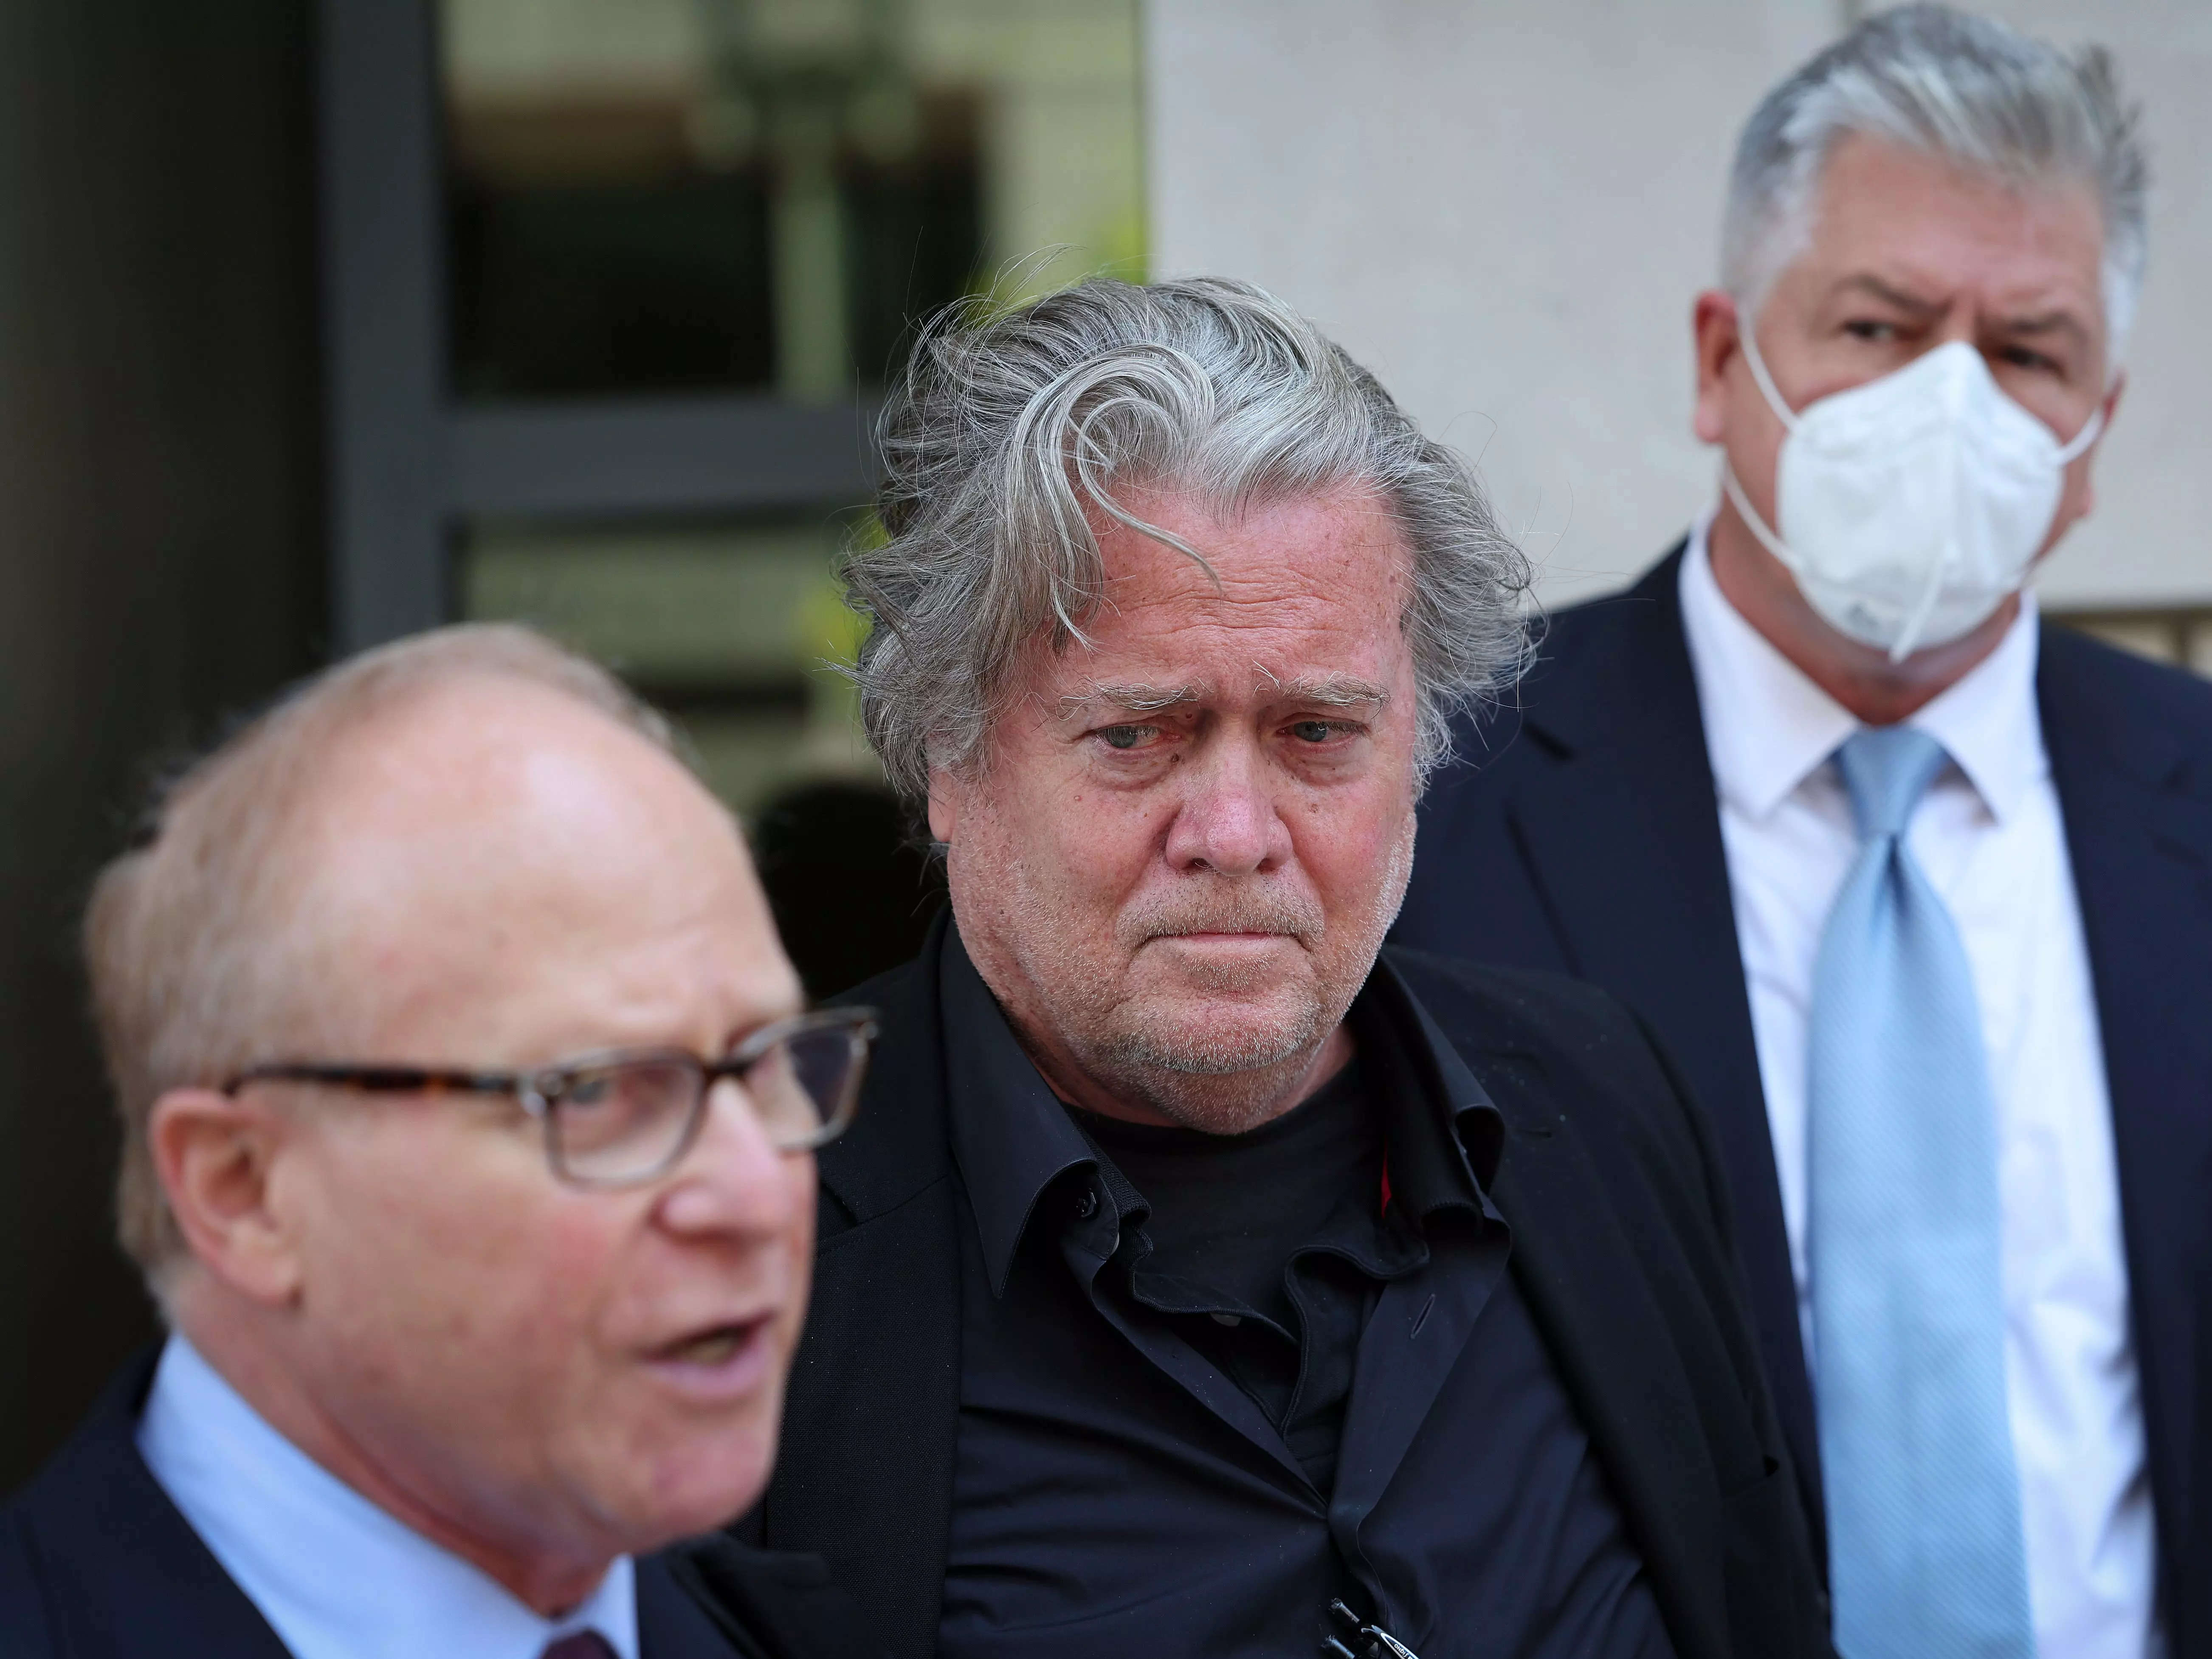 Steve Bannon wants his trial to be a 'political circus', says House Democrats lawyer